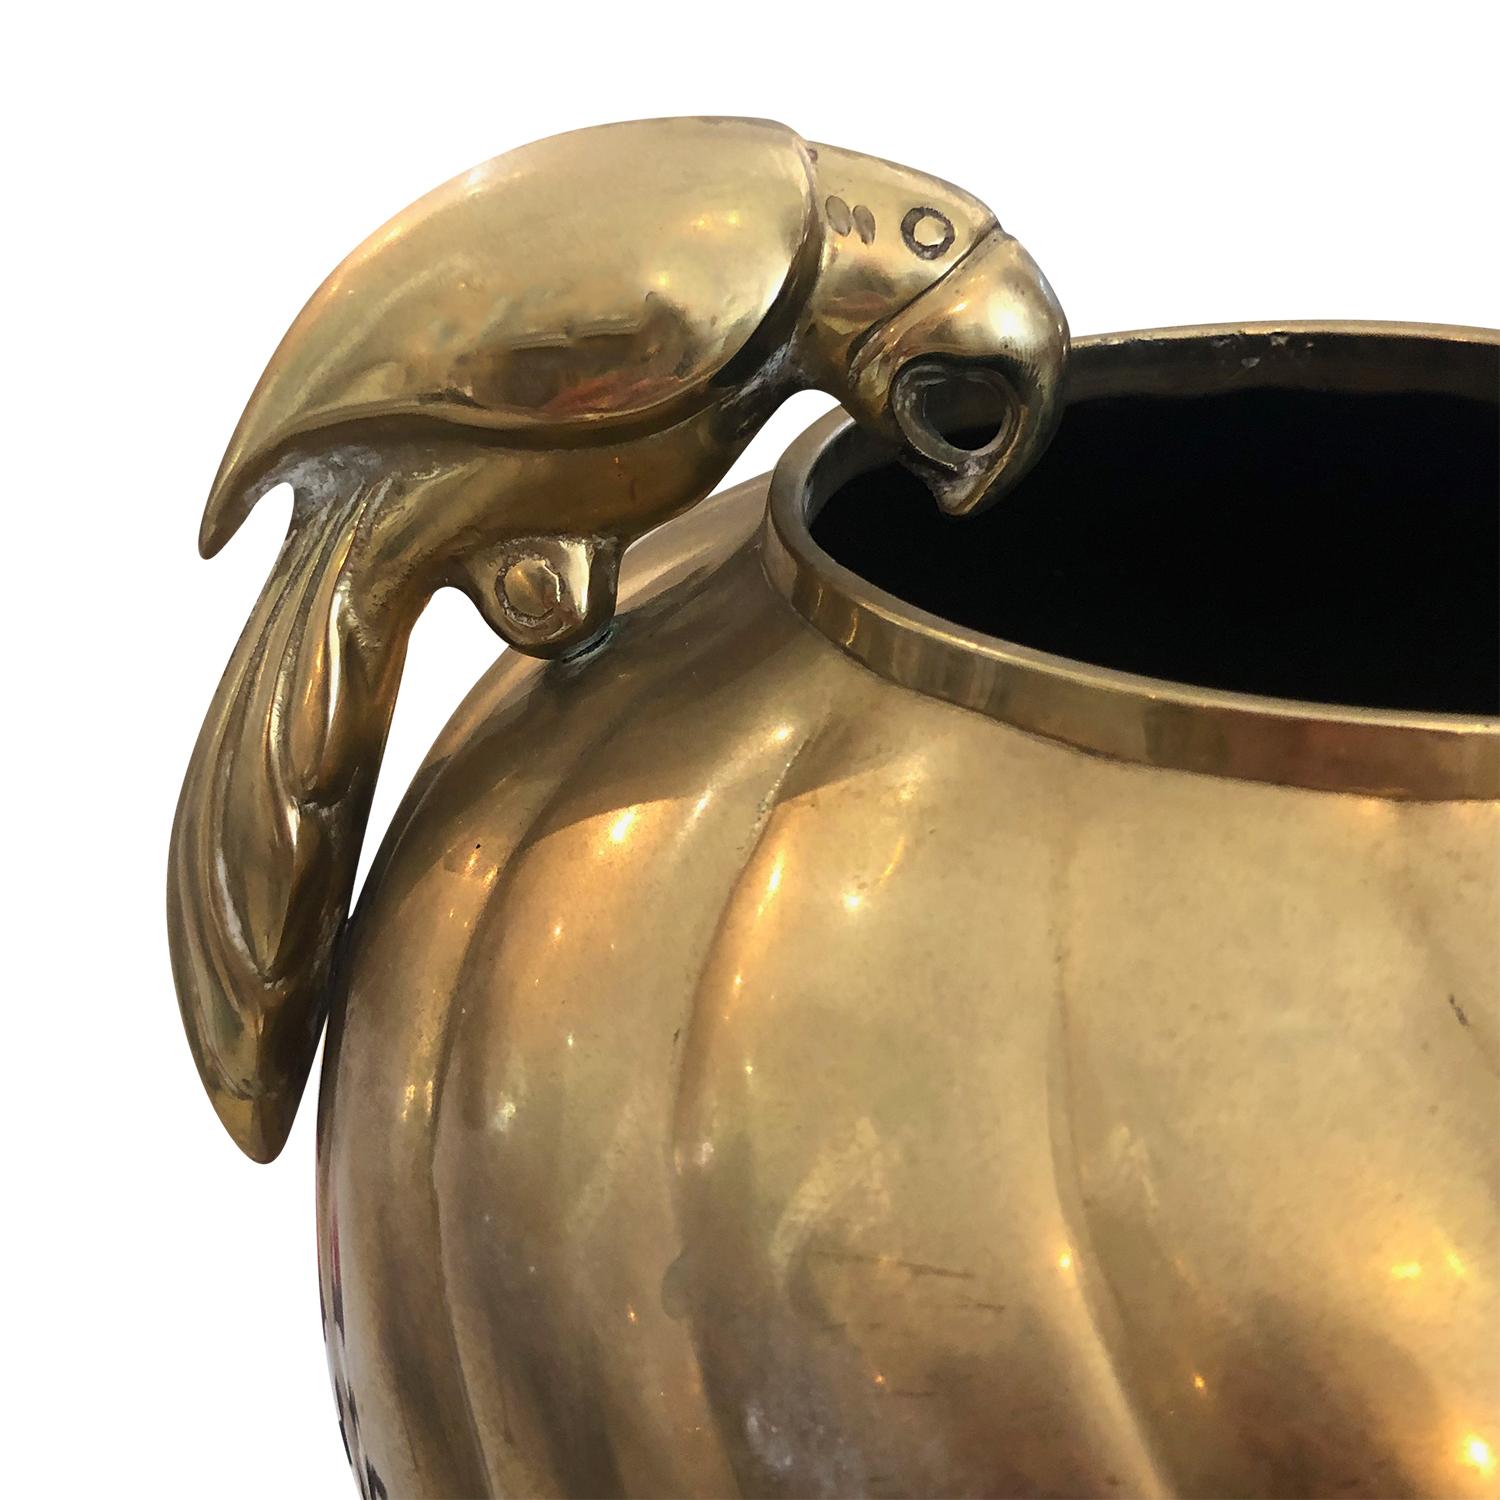 Hand-Crafted 20th Century American Decorative Brass Ribbed Vase with Lateral Parrots